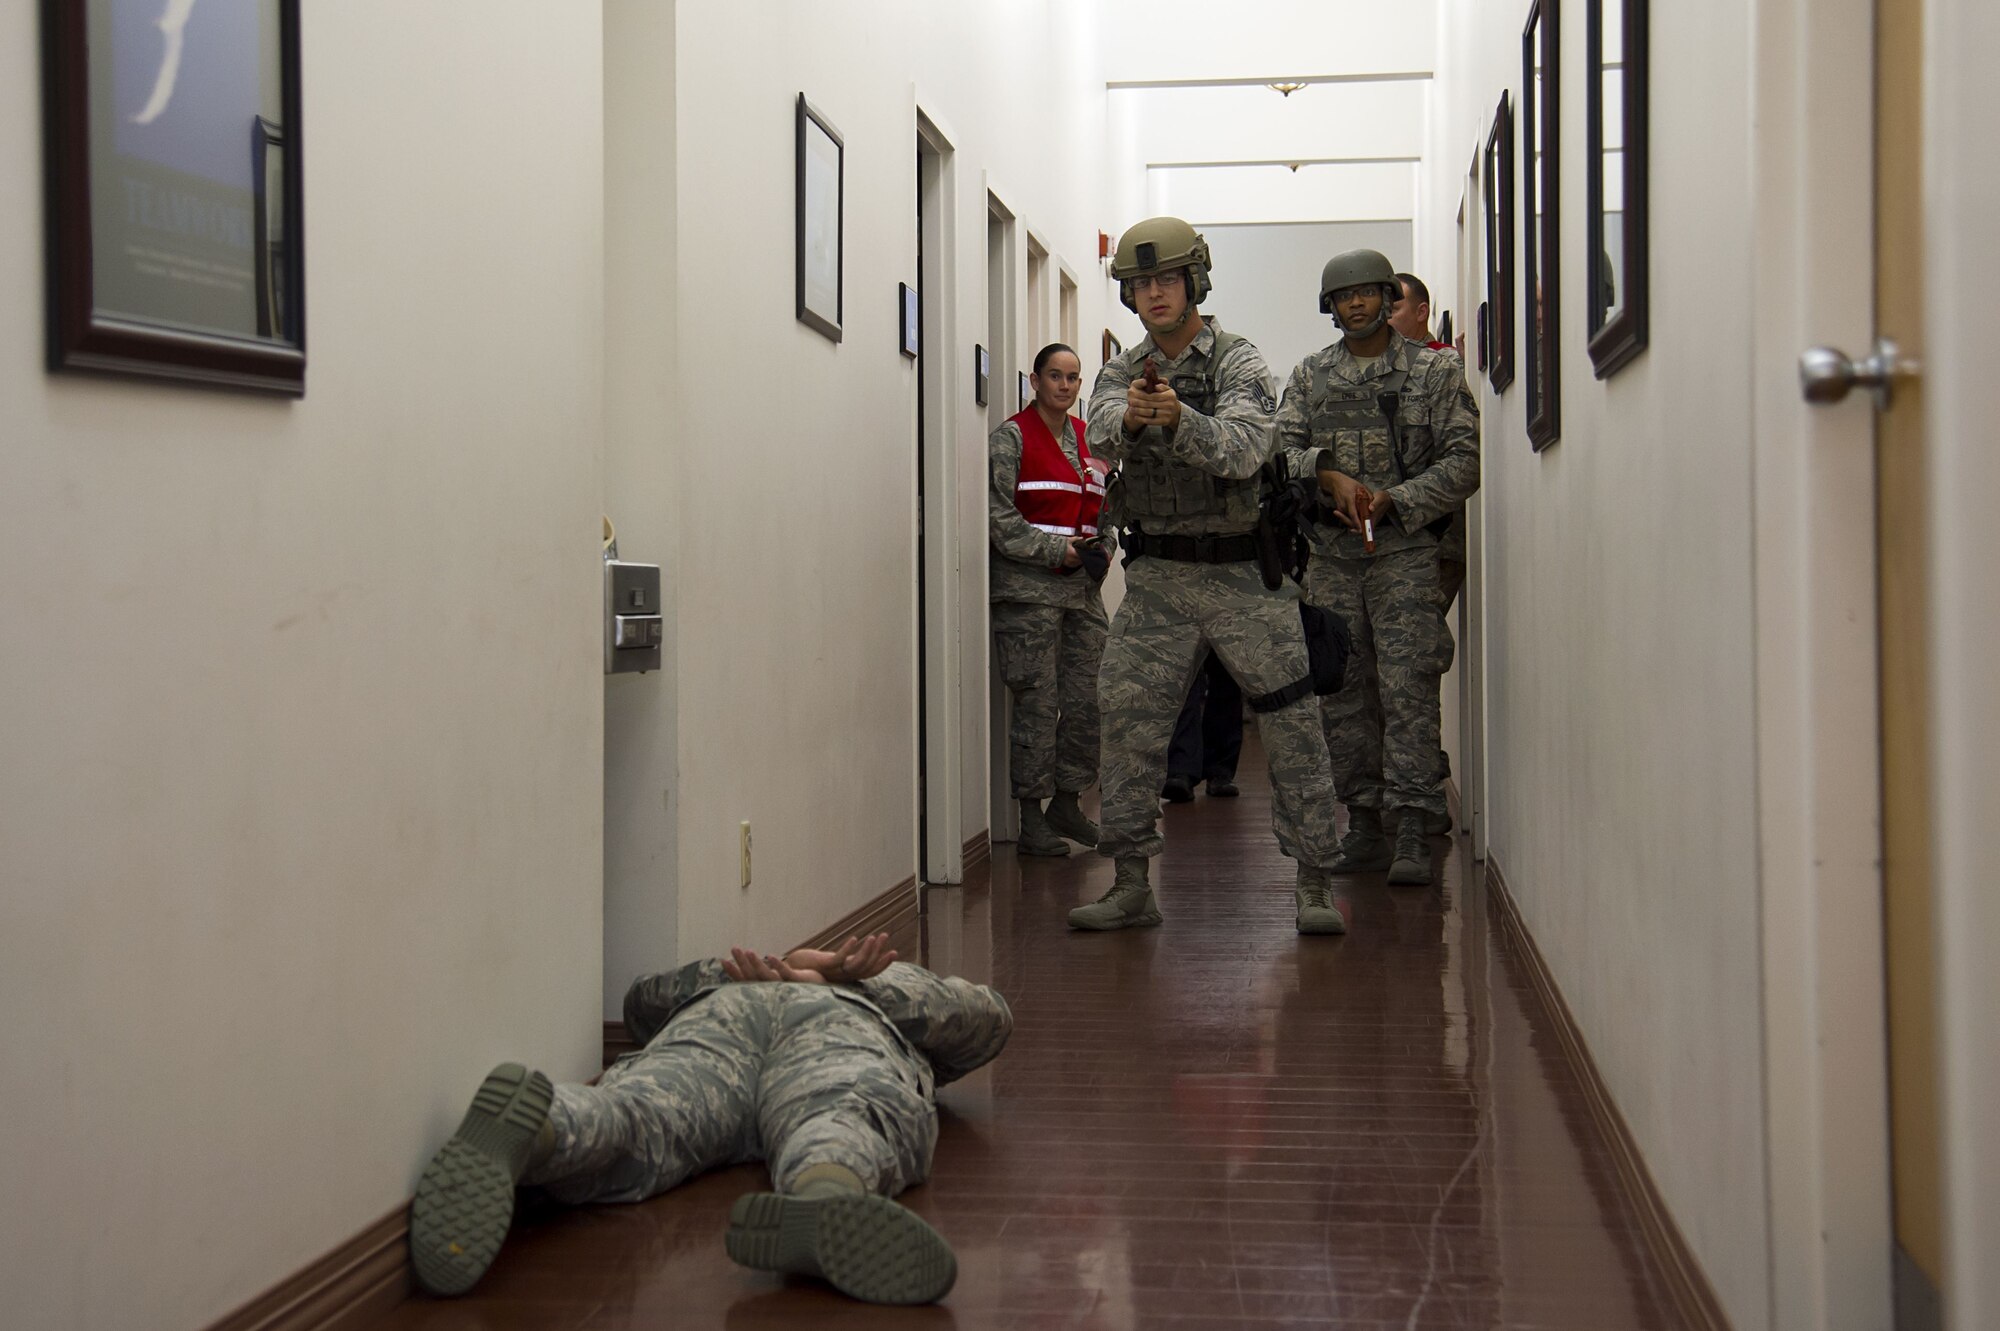 Airmen assigned to the 6th Security Forces Squadron interact with a simulated “victim” during an active shooter exercise at MacDill Air Force Base, Fla., Jan. 9, 2017. This exercise served as an opportunity for law enforcement and first responders to train on faster and better ways to respond to an active shooter situation.